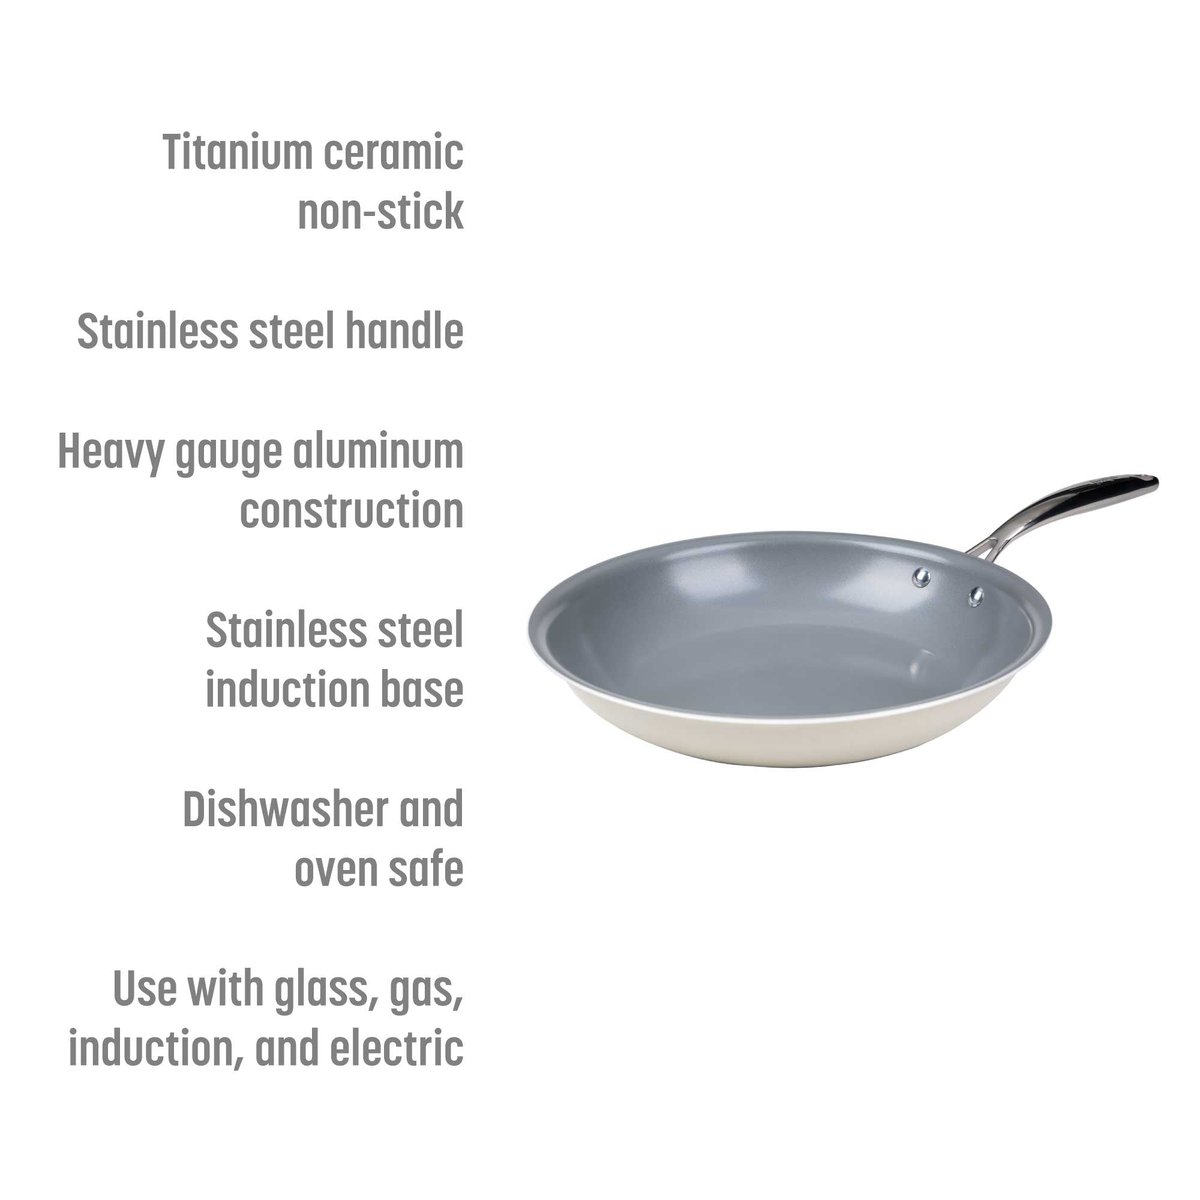 https://images.verishop.com/goodful-kitchen-goodful-11-inch-ceramic-nonstick-frying-pan-dishwasher-safe-skillet-with-comfort-grip-stainless-steel-handle-pfoa-free-cream/M00741393480047-3903453828?auto=format&cs=strip&fit=max&w=1200